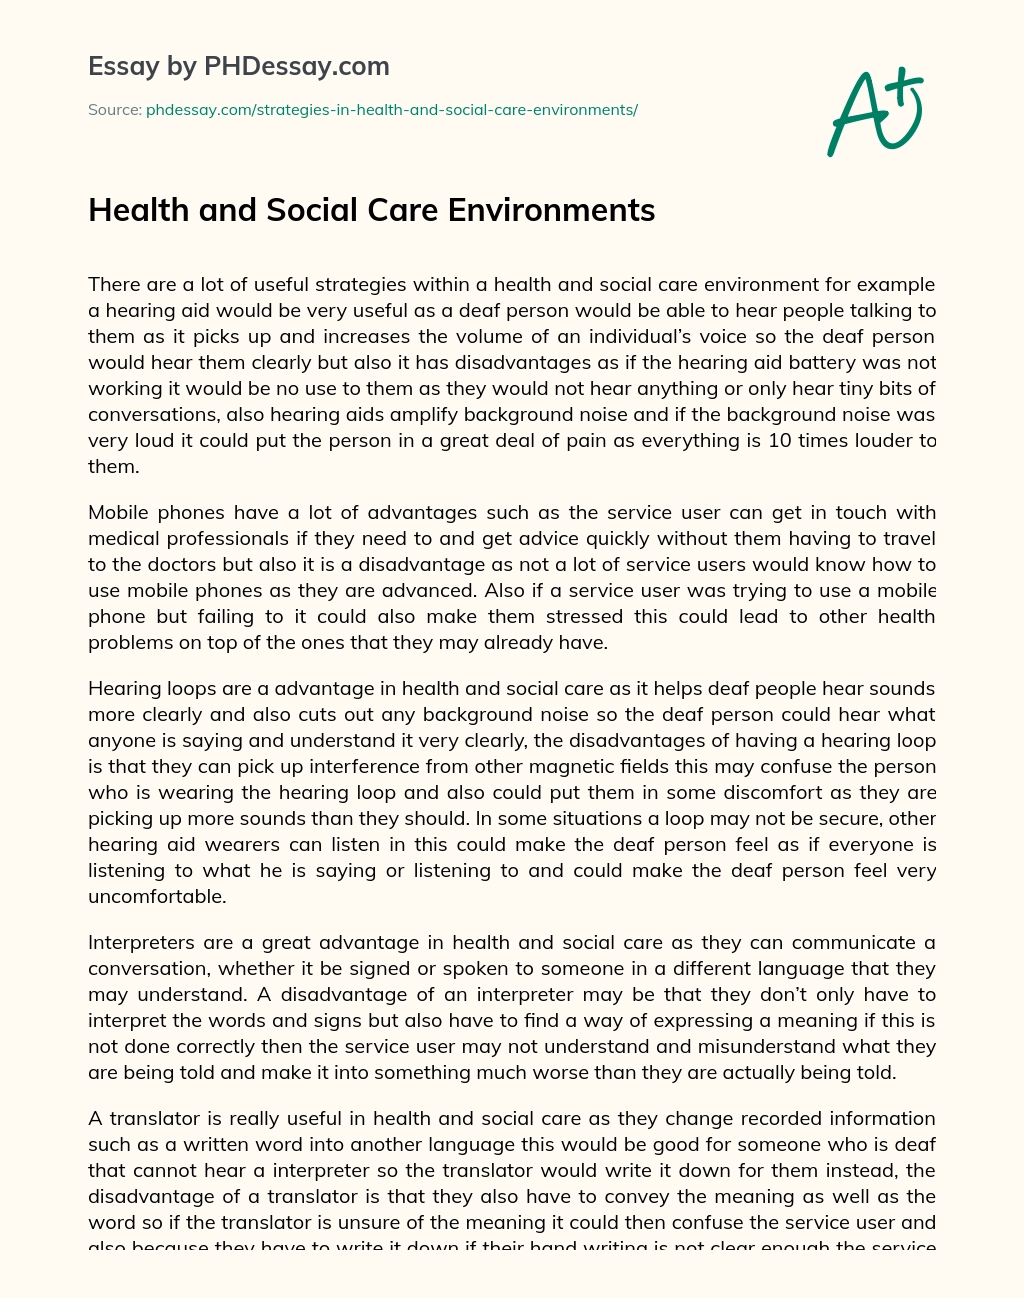 Health and Social Care Environments essay